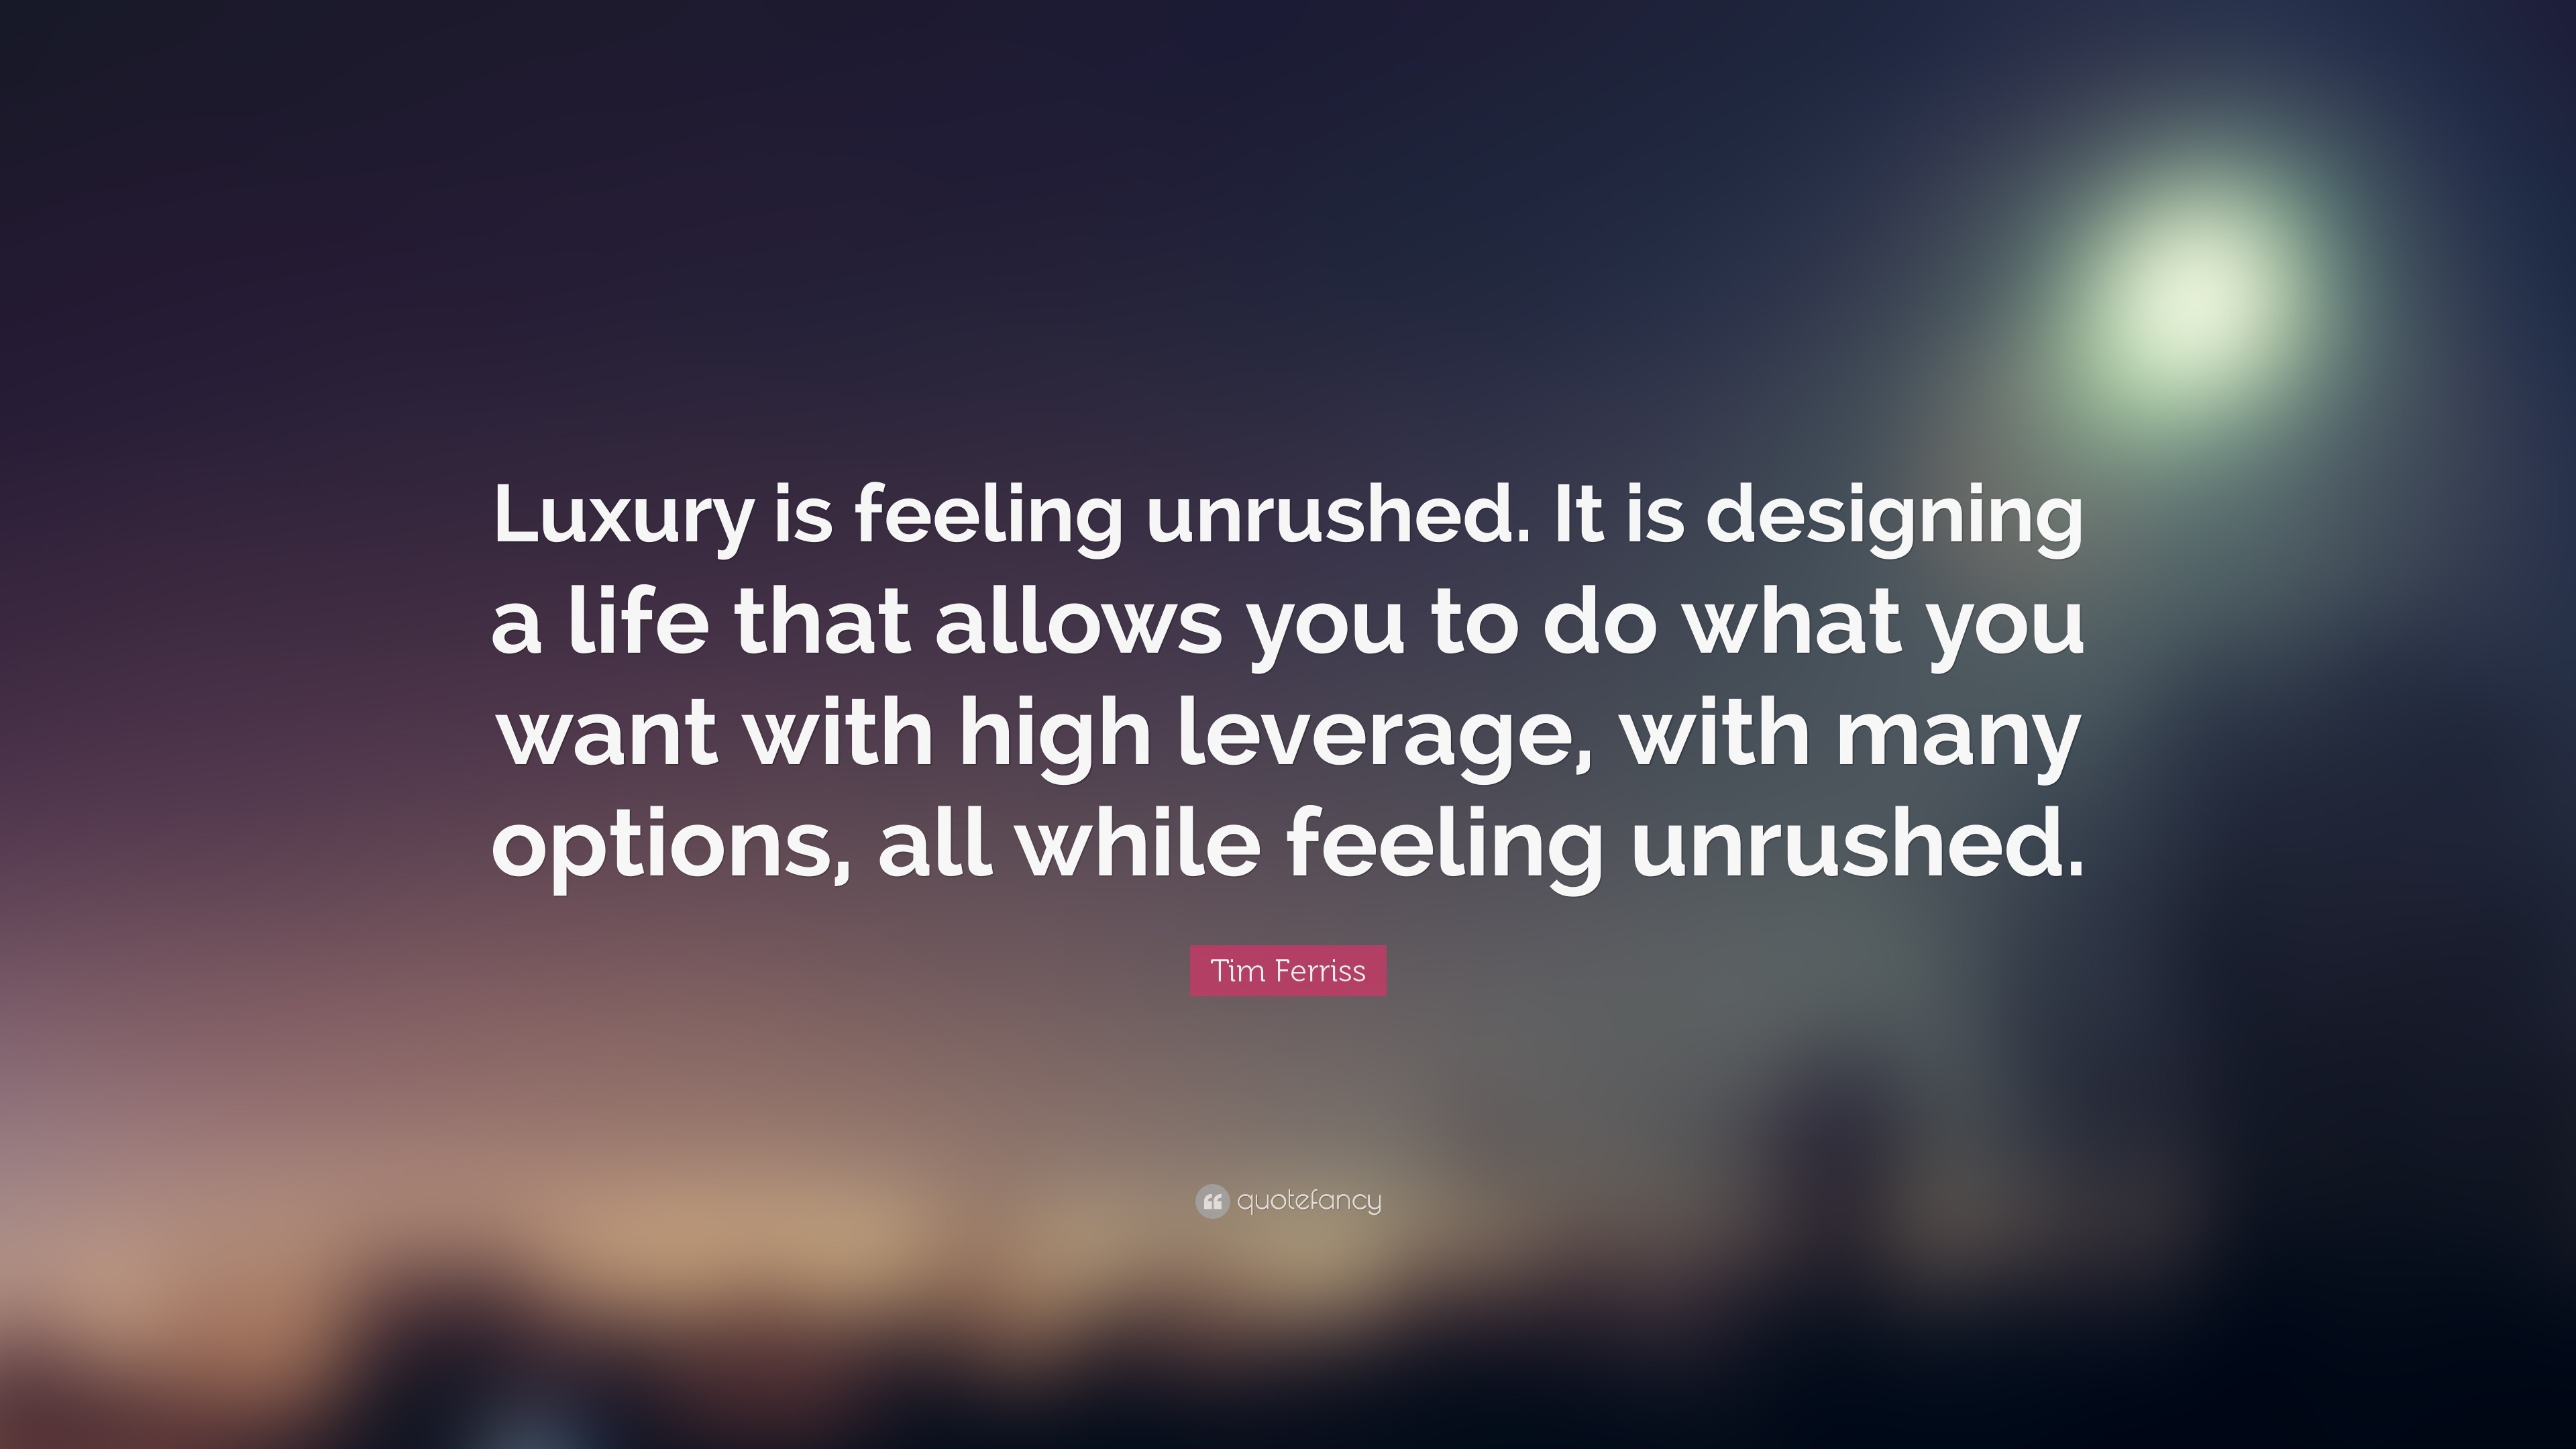 Tim Ferriss Quote “Luxury is feeling unrushed It is designing a life that